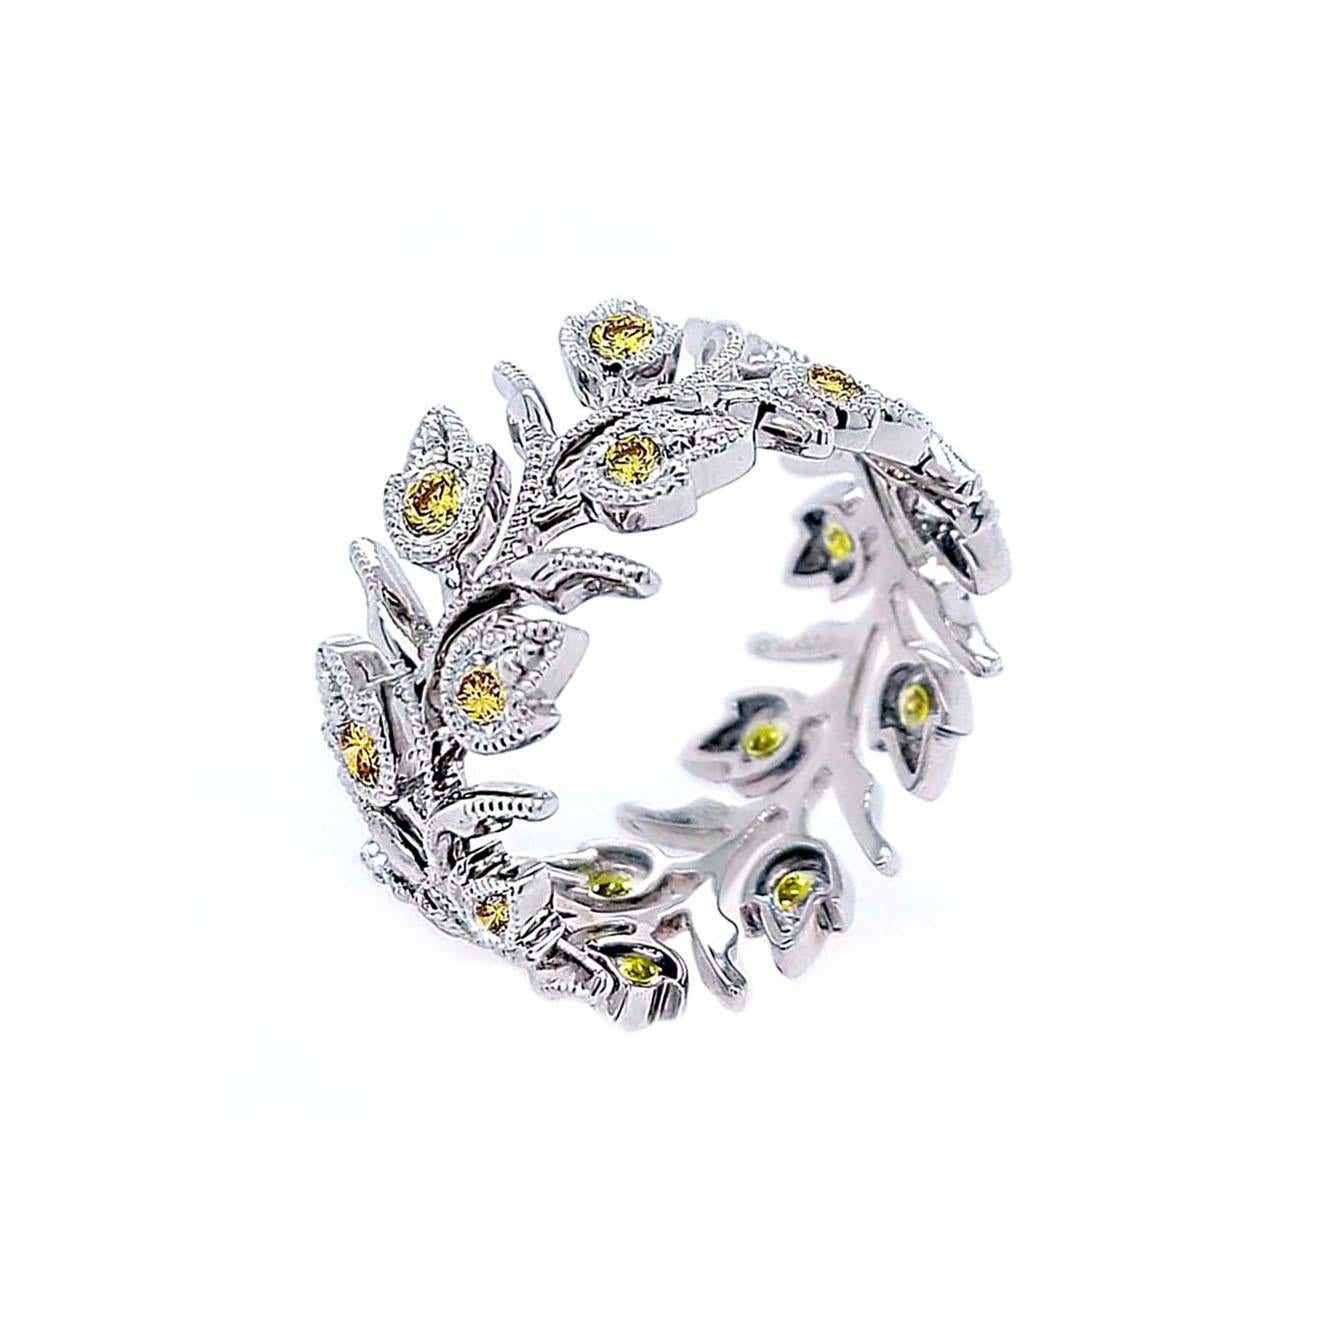 Produced by award winning Italian designer Stefano Vitolo. Stefano creates custom artisanal one of a kind jewelry with excellent gemstones in a truly old world Italian craftmanship.
This handcrafted ring has 0.82 total carat weight of Fancy Yellow